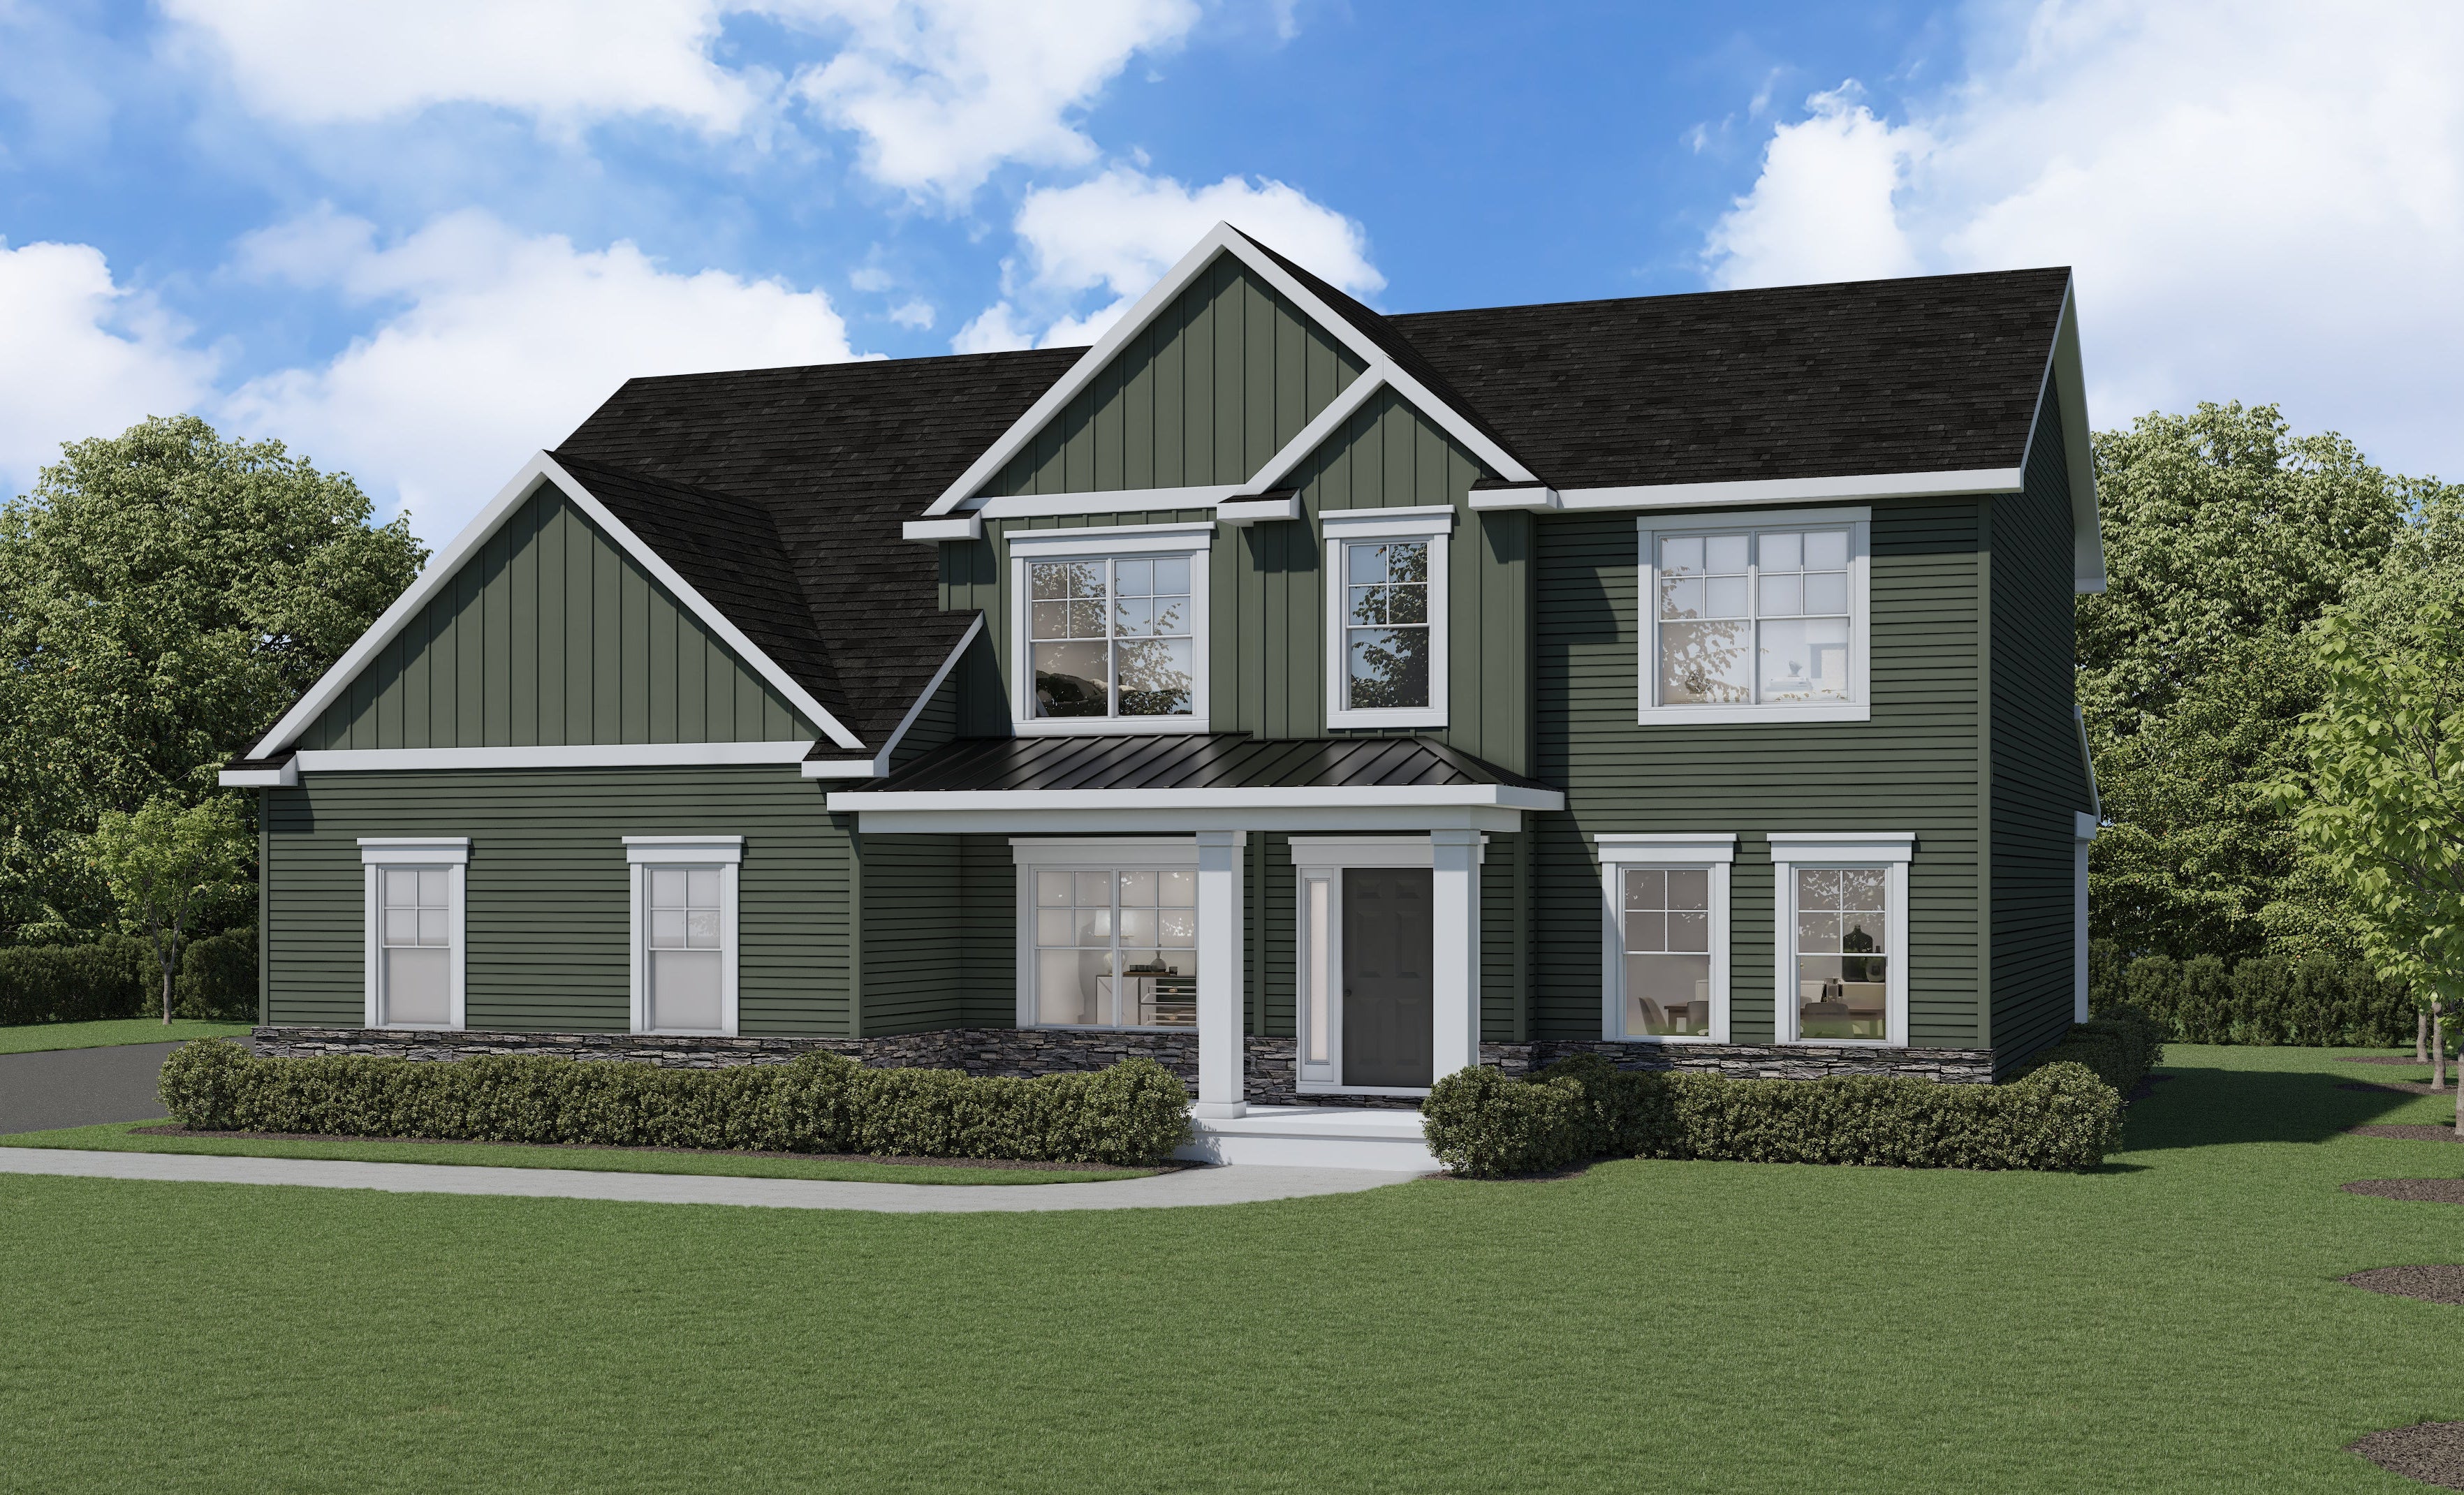 2,962sf New Home in Orchard Park, NY